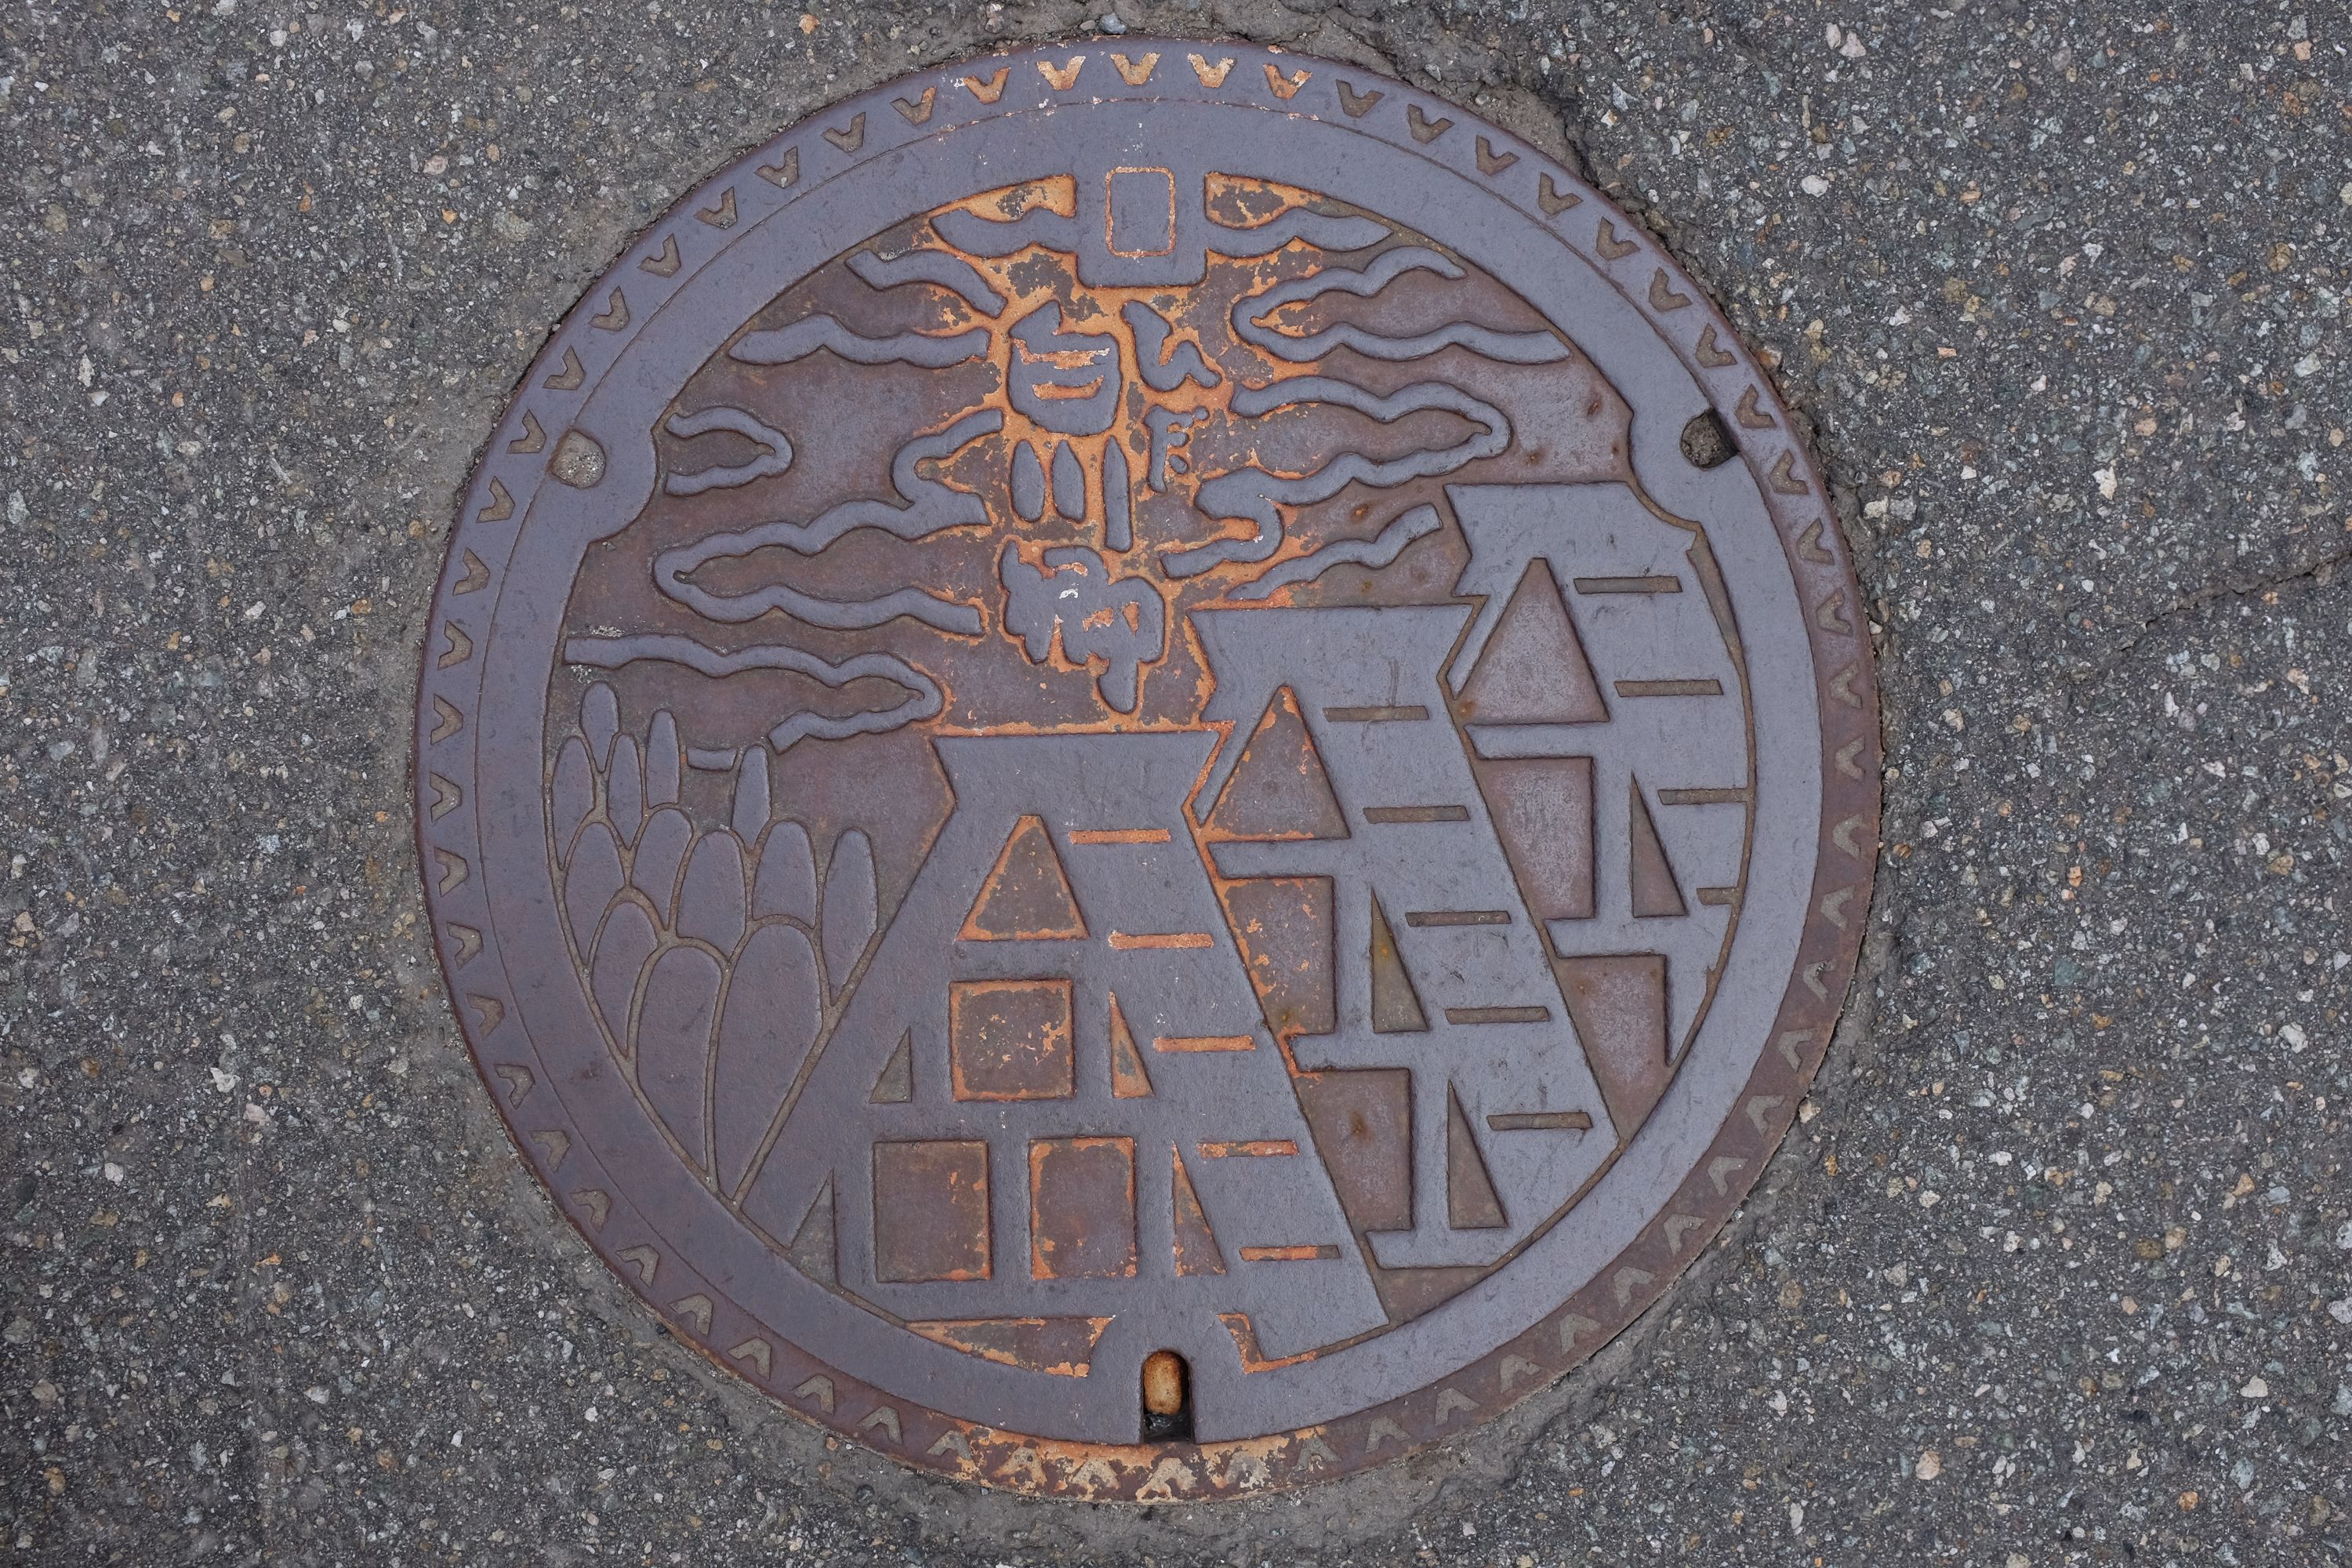 Manhole cover showing a group of thatch-roofed houses.